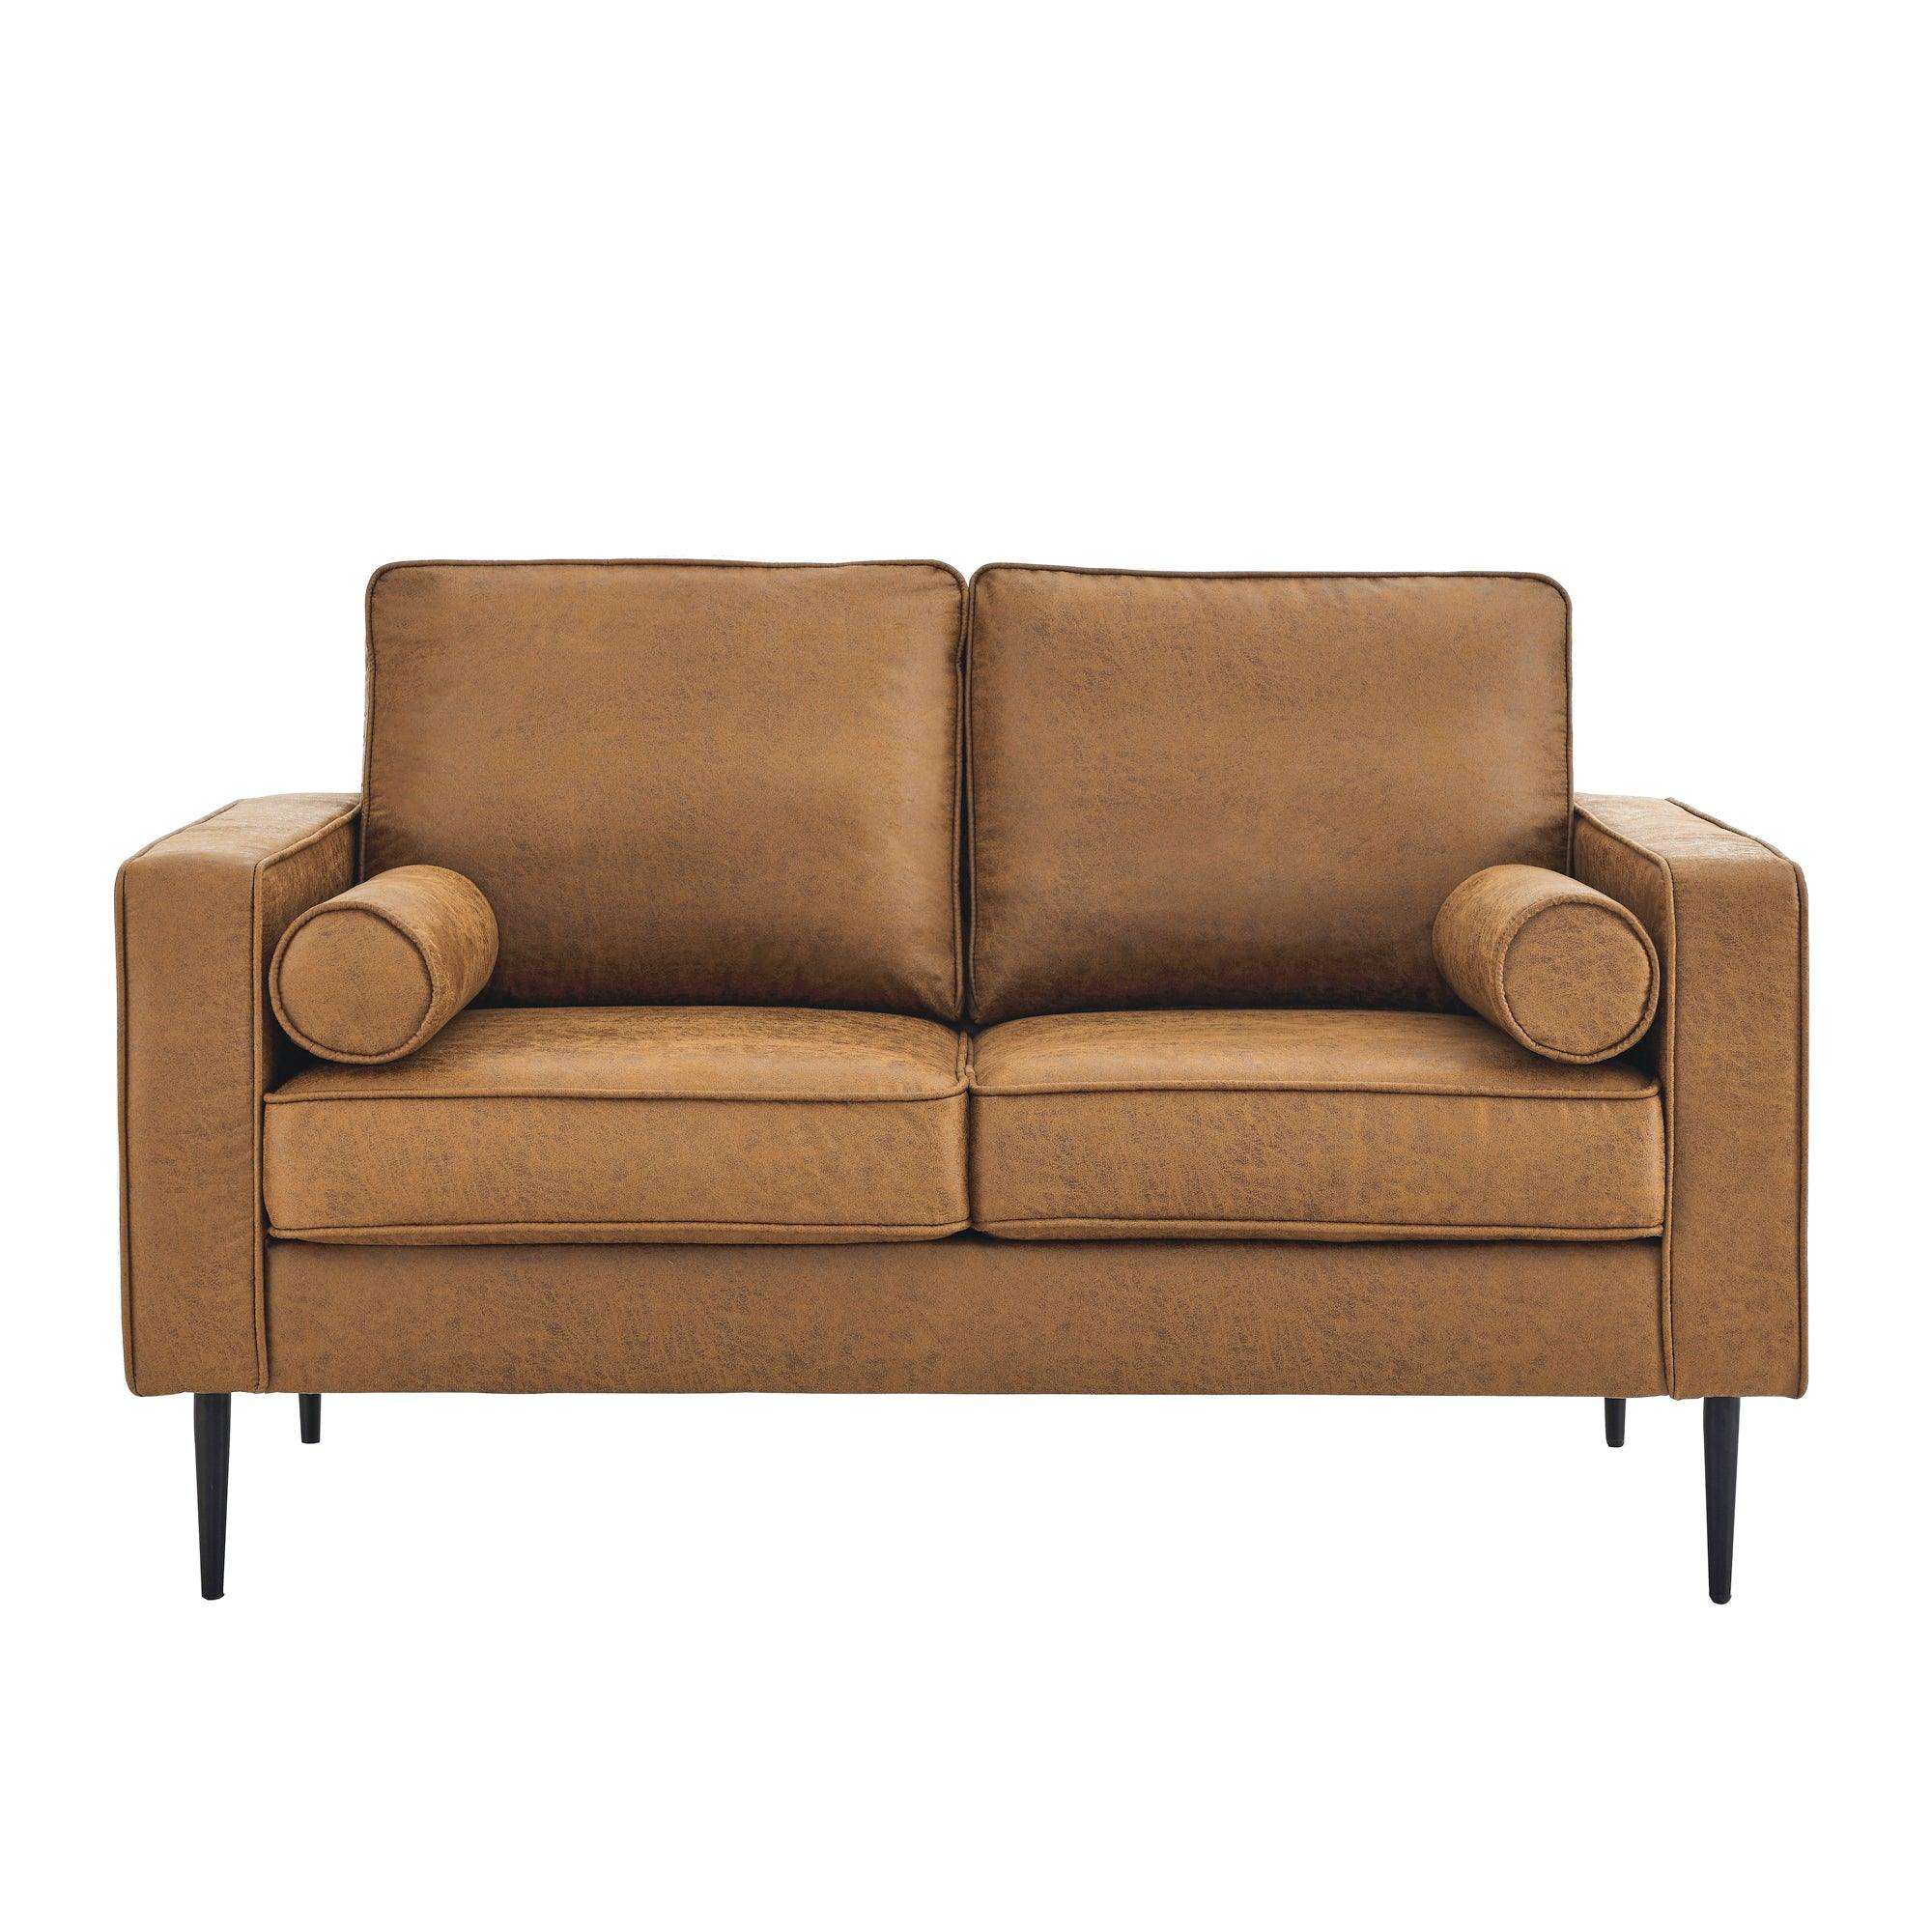 🆓🚛 57"Mid-Century Modern Couch With High-Tech Fabric Surface/ Upholstered Cushions/Pillows, Seat Sofas&Couches for Living Room Apartment Office, Large-Brown